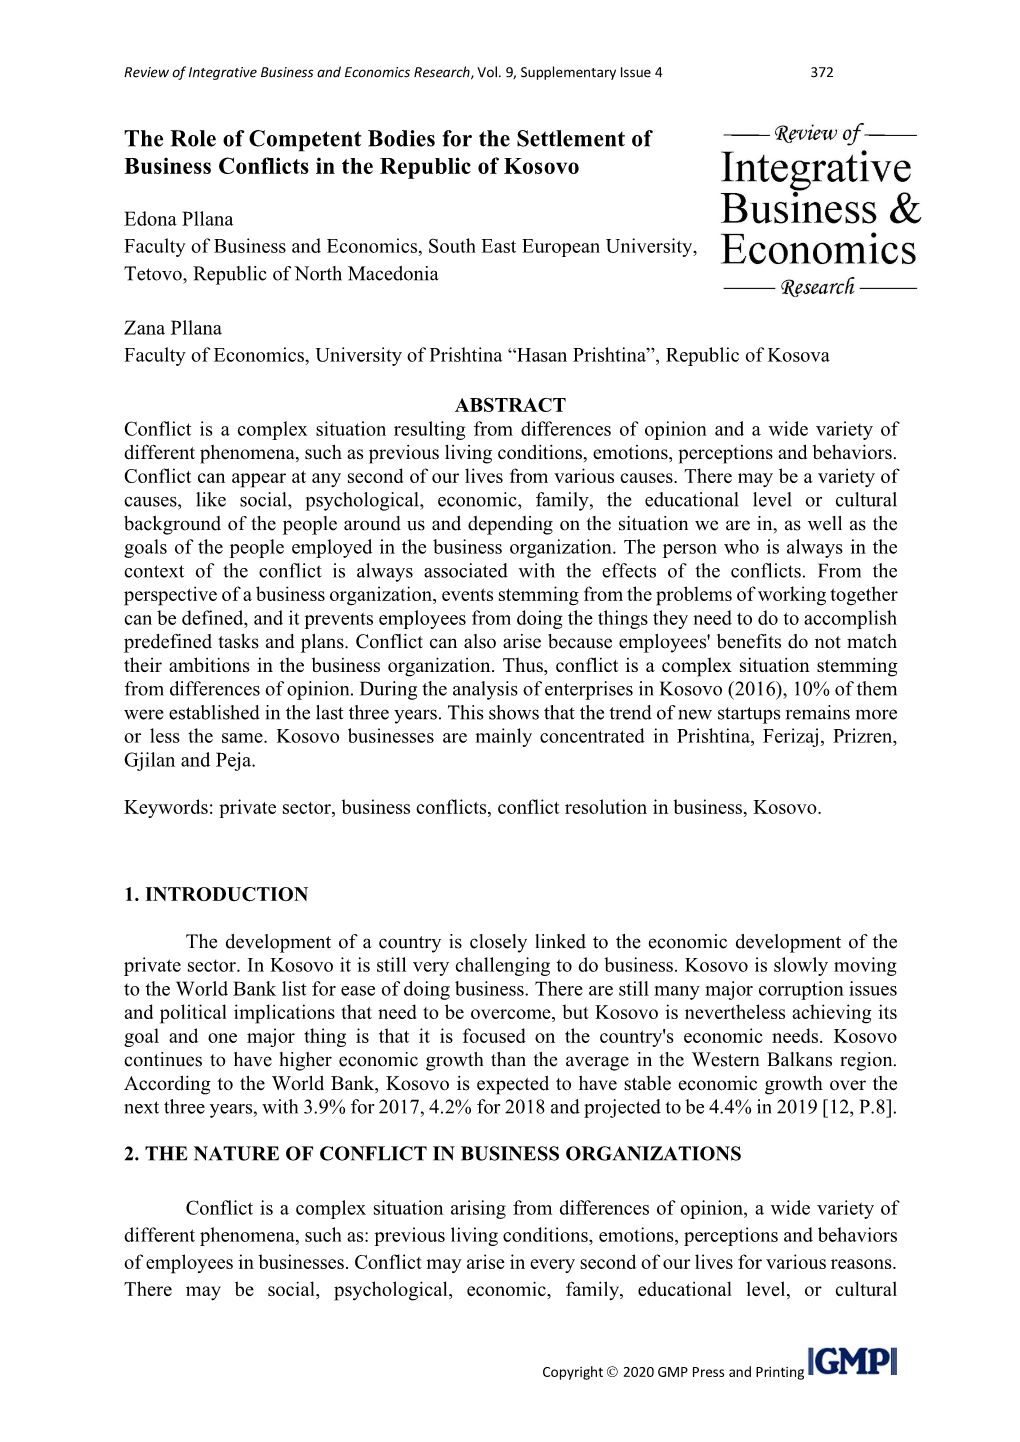 The Role of Competent Bodies for the Settlement of Business Conflicts in the Republic of Kosovo